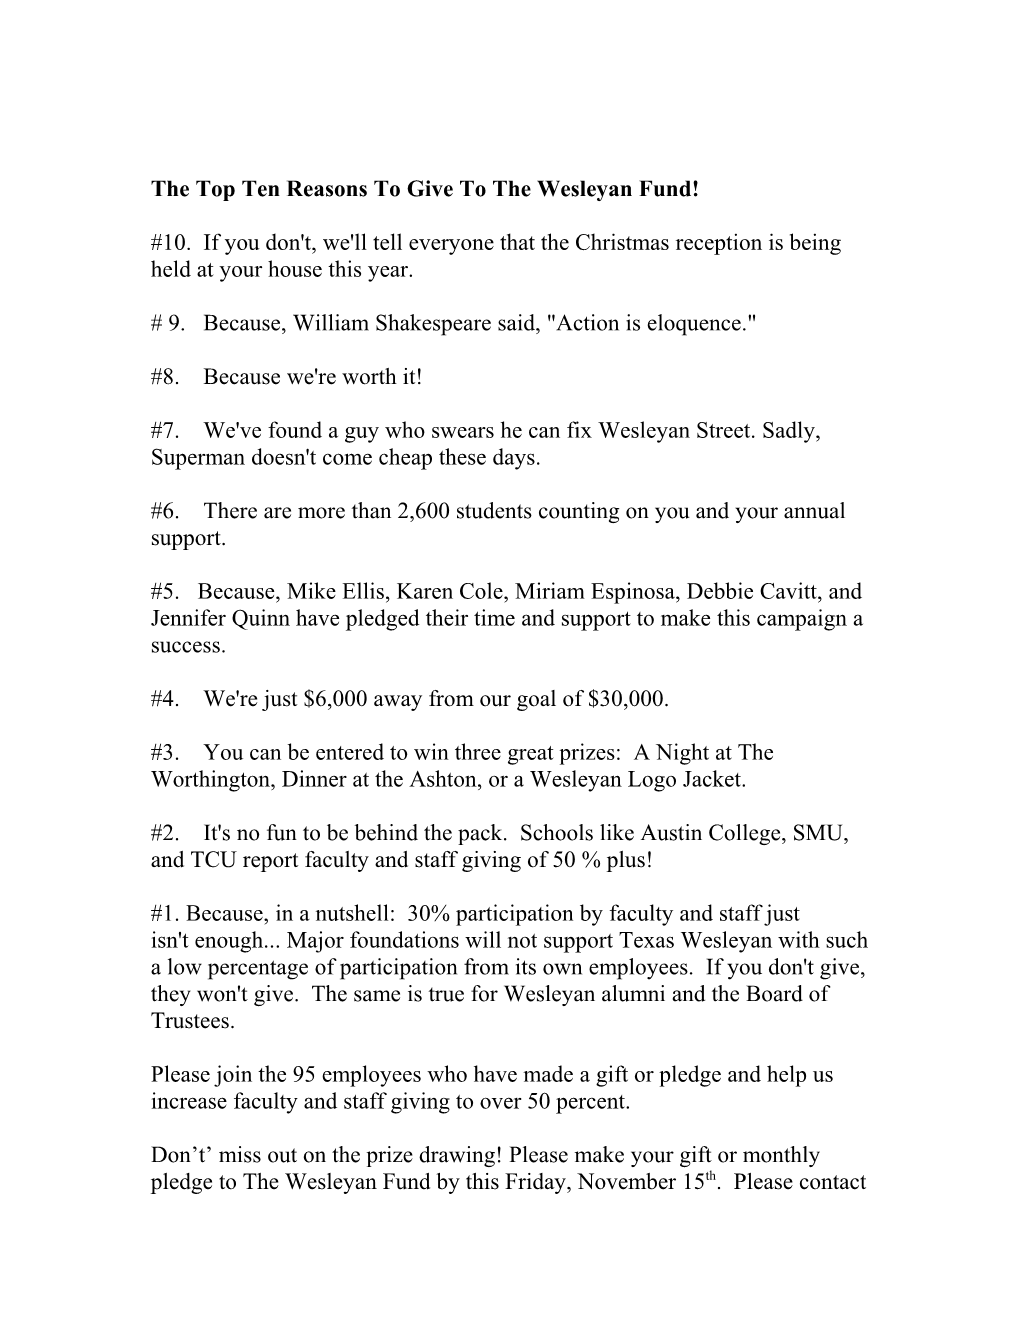 The Top Ten Reasons to Give to the Wesleyan Fund